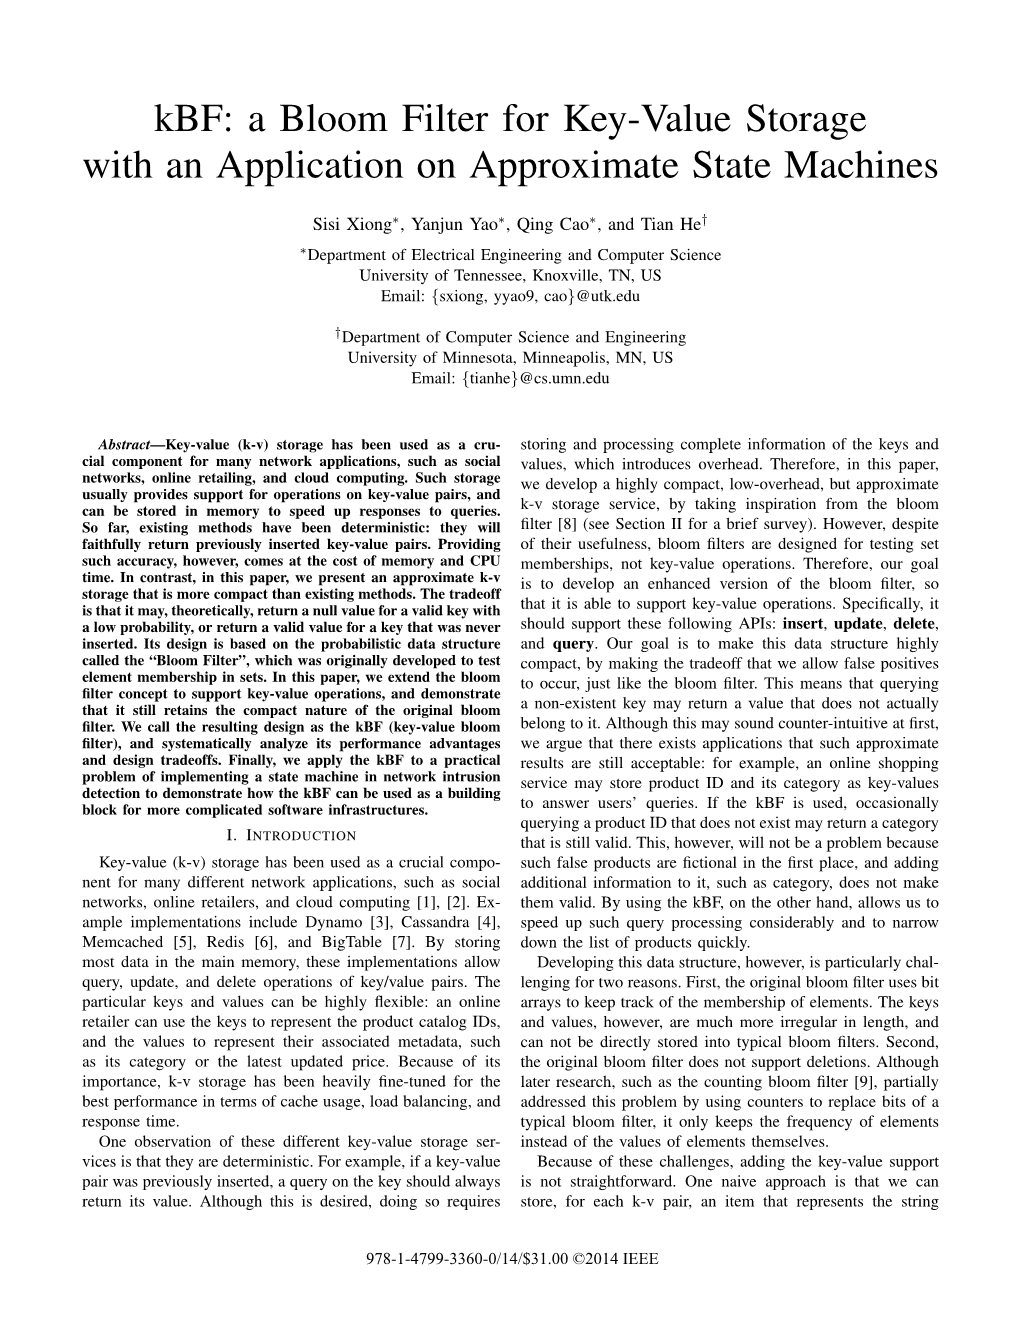 Kbf: a Bloom Filter for Key-Value Storage with an Application on Approximate State Machines